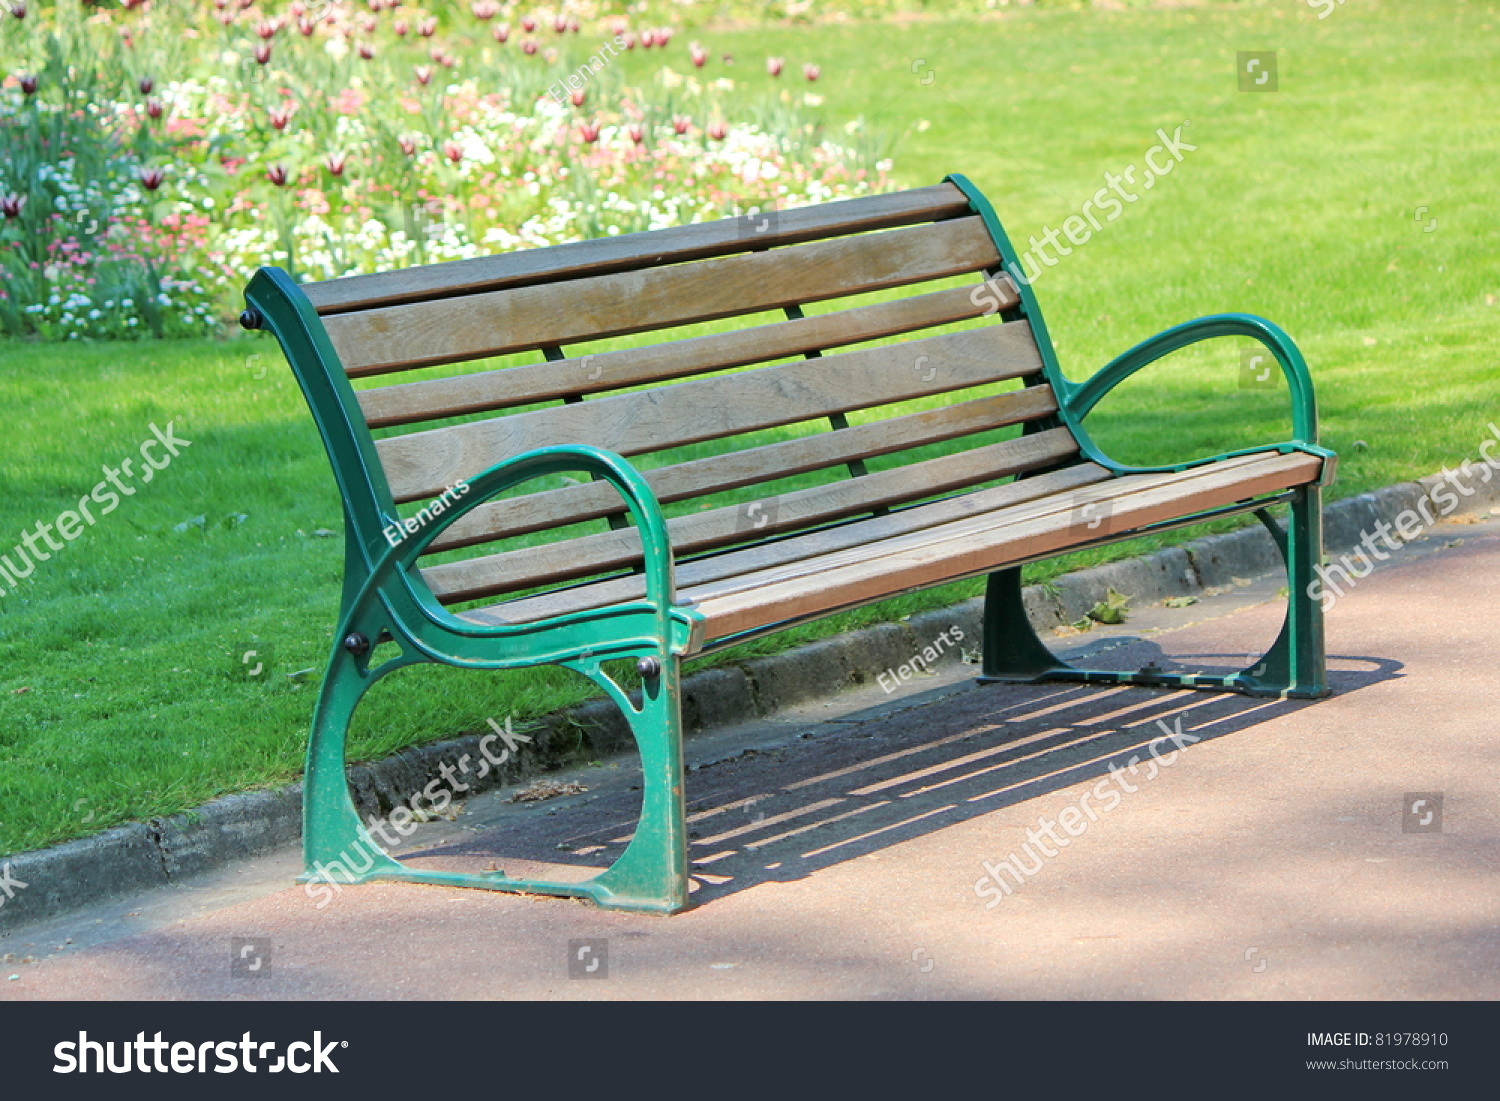 Green And Brown Wood Bench In A Park With Grass And Flowers Behind ...